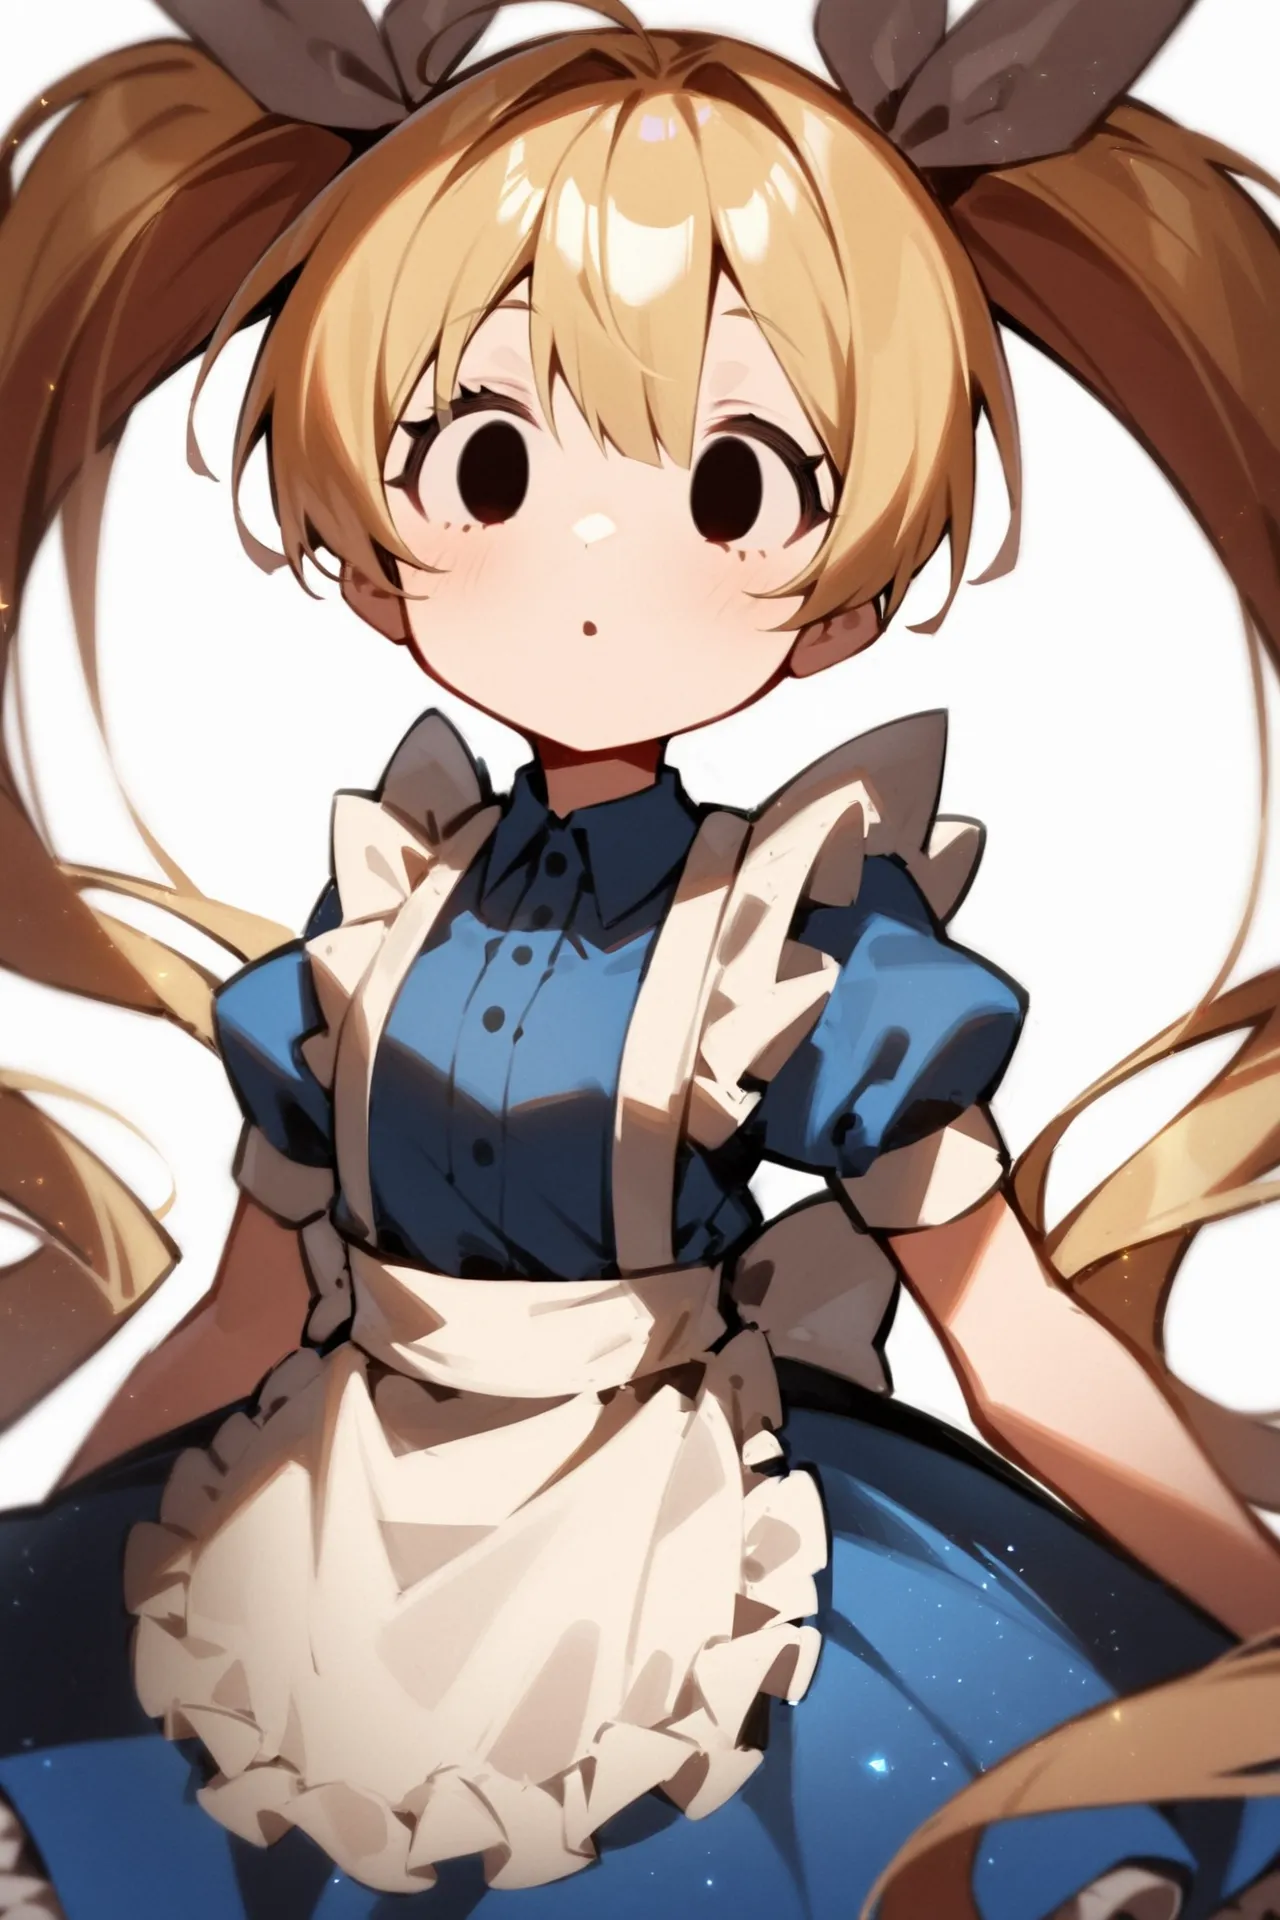 '1girl, solid circle eyes,\nblonde hair, twintails, blue dress, white apron,\nwhite background,\nAlice in glitterworld\nNegative prompt: (worst quality, low quality:1.4), nsfw\nSteps: 35, Sampler: DPM++ 2M SDE Karras, CFG scale: 7, Seed: 1, Size: 640x960, Model hash: 642b08ca49, Model: ConfusionXL2.0_fp16_vae, VAE hash: 63aeecb90f, VAE: sdxl_vae_0.9.safetensors, Denoising strength: 0.6, Clip skip: 2, Hires upscale: 2, Hires steps: 15, Hires upscaler: ESRGAN_4x, Eta: 0.68, Version: v1.7.0'